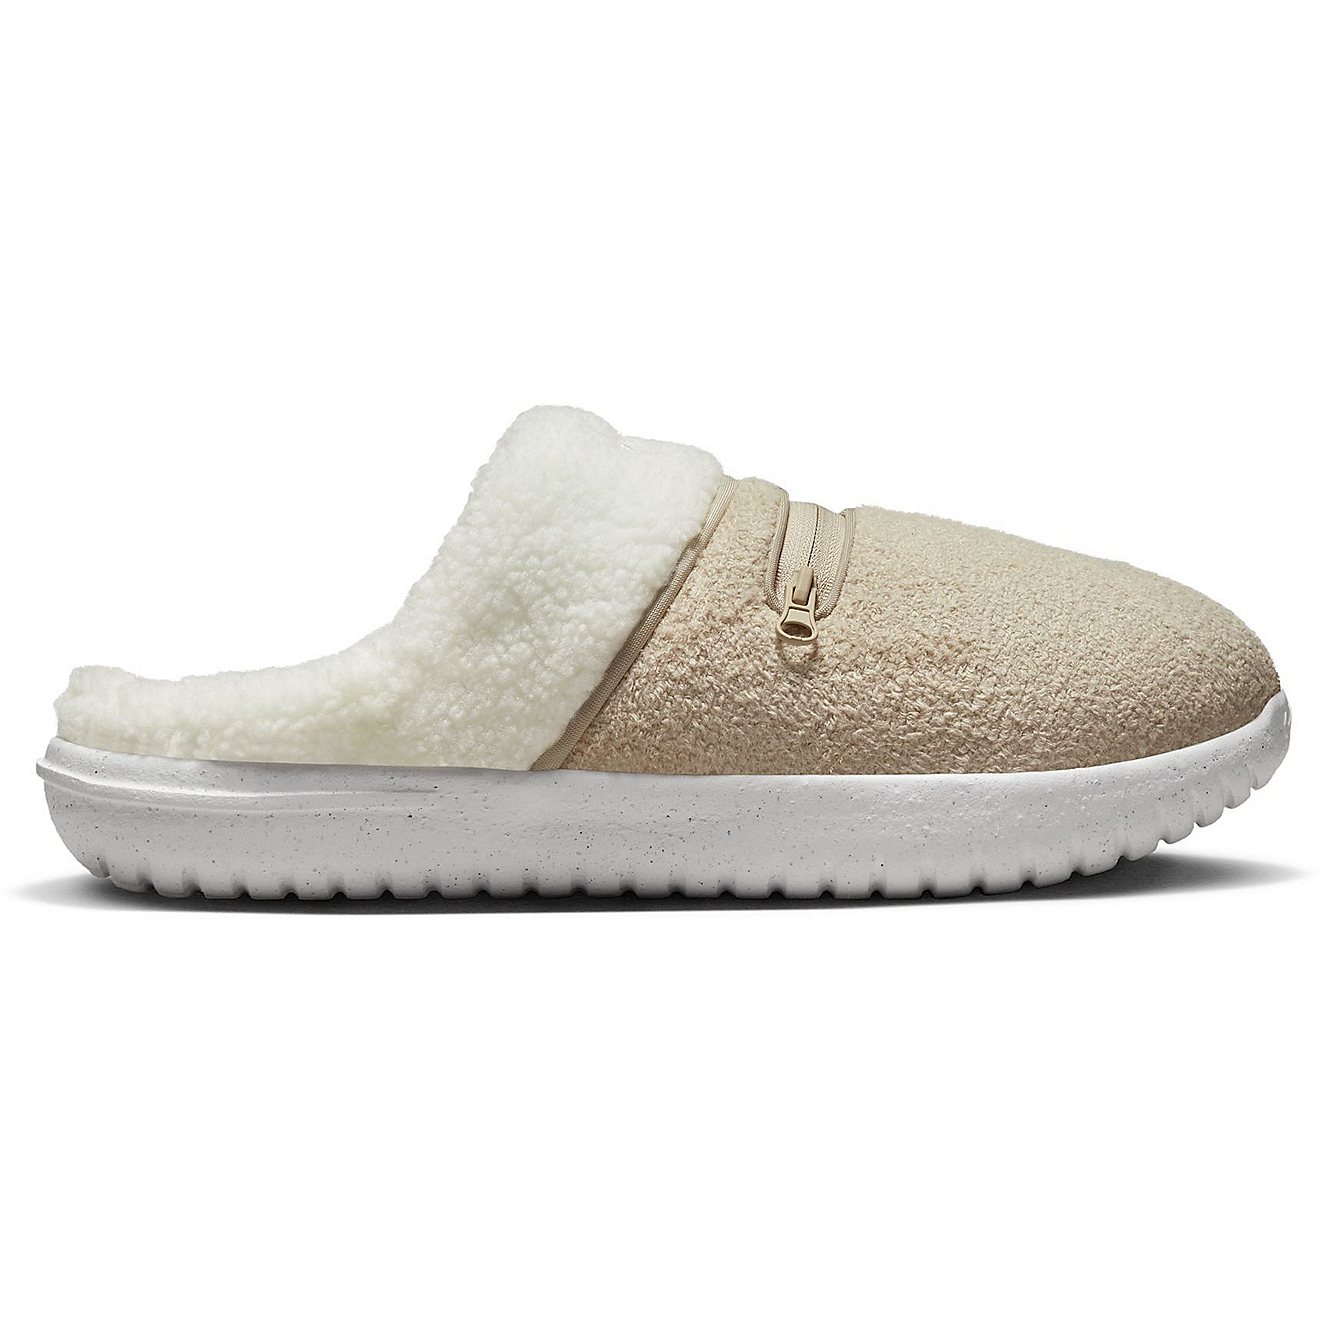 Nike Women's Burrow SE Slippers | Free Shipping at Academy